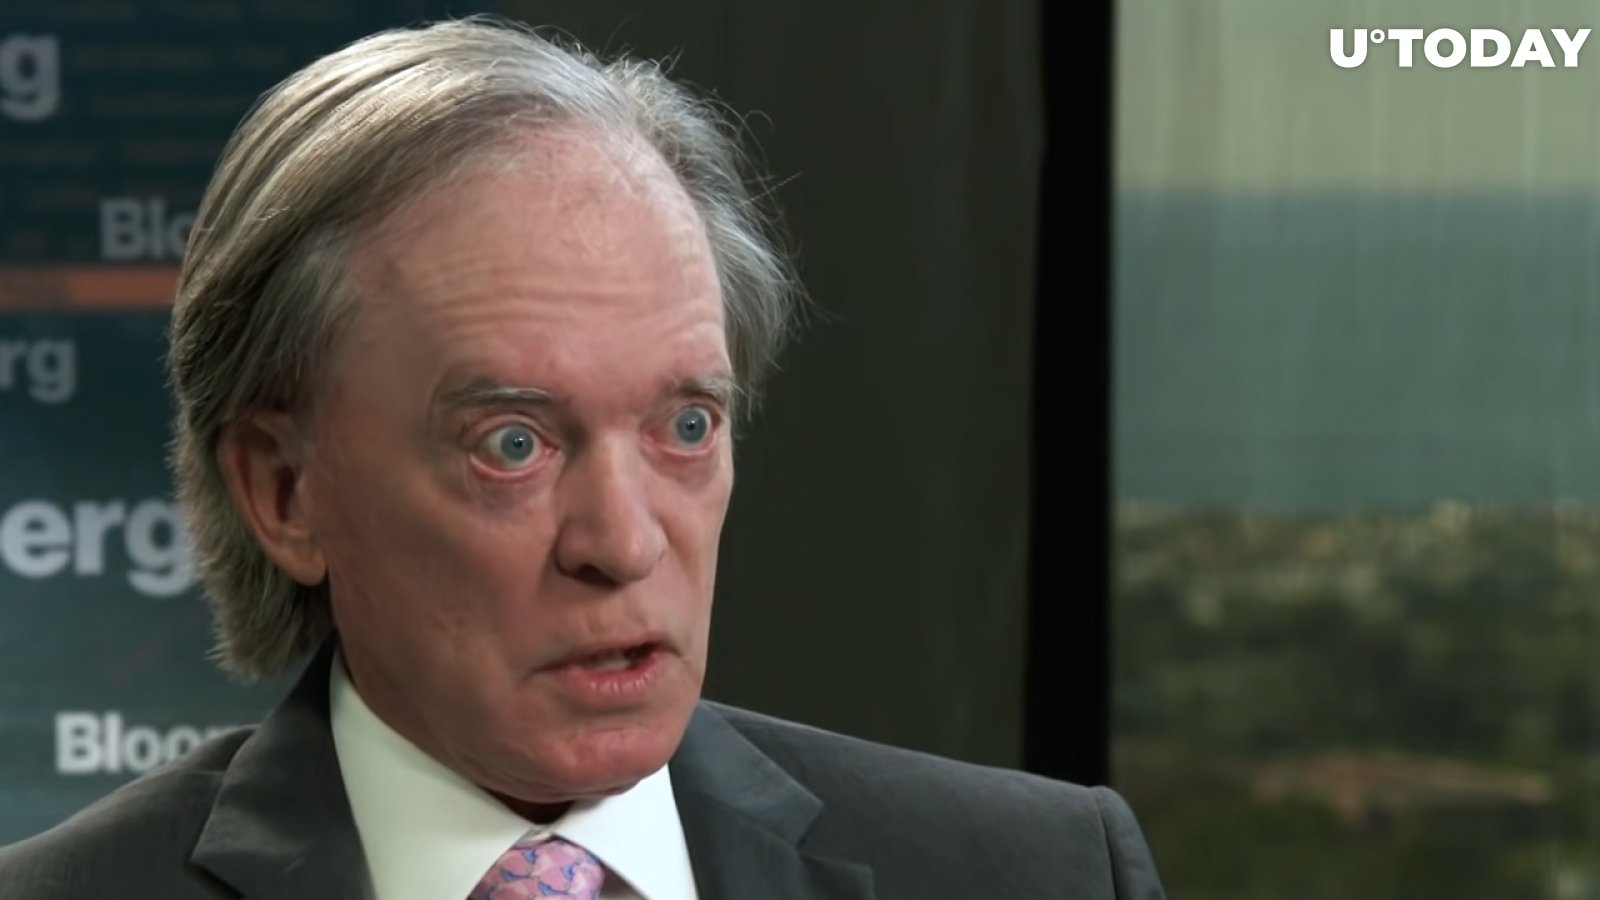 Billionaire Investor Bill Gross Says He Owns Some Investment in Bitcoin